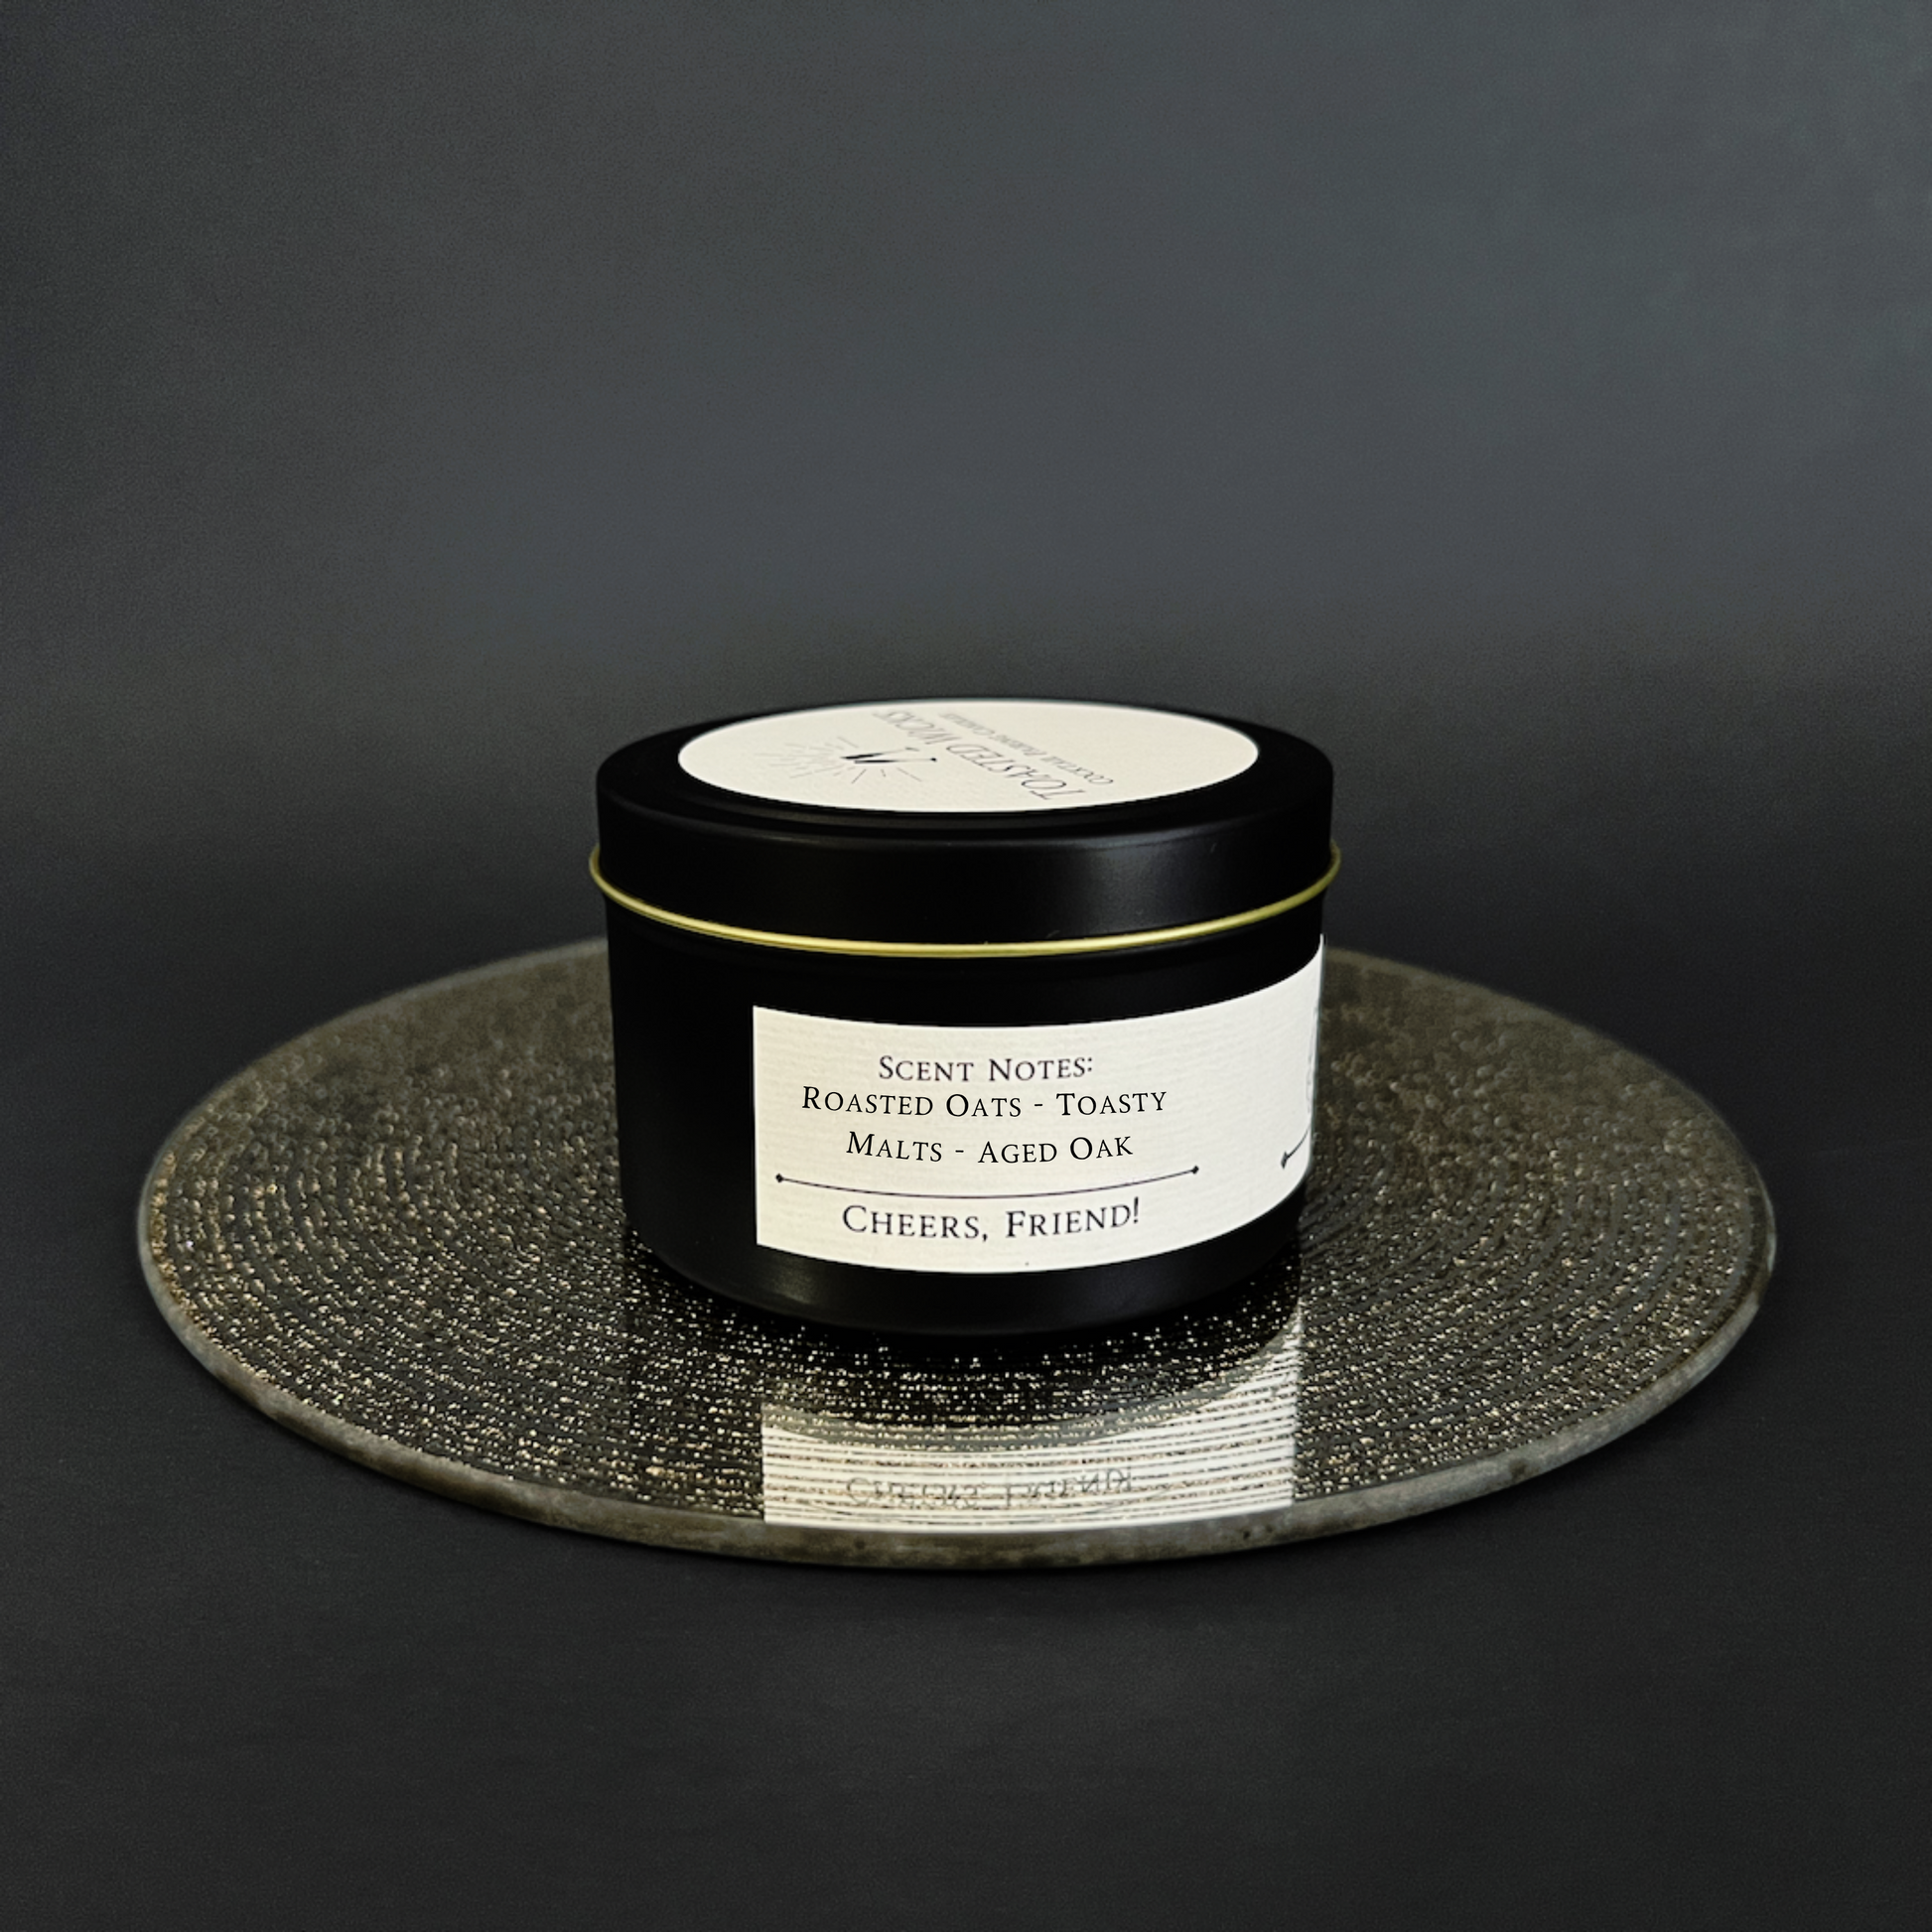 Dark Beer Candle - Scent Notes of Roasted Oats, Toasted Malts, aged Oak